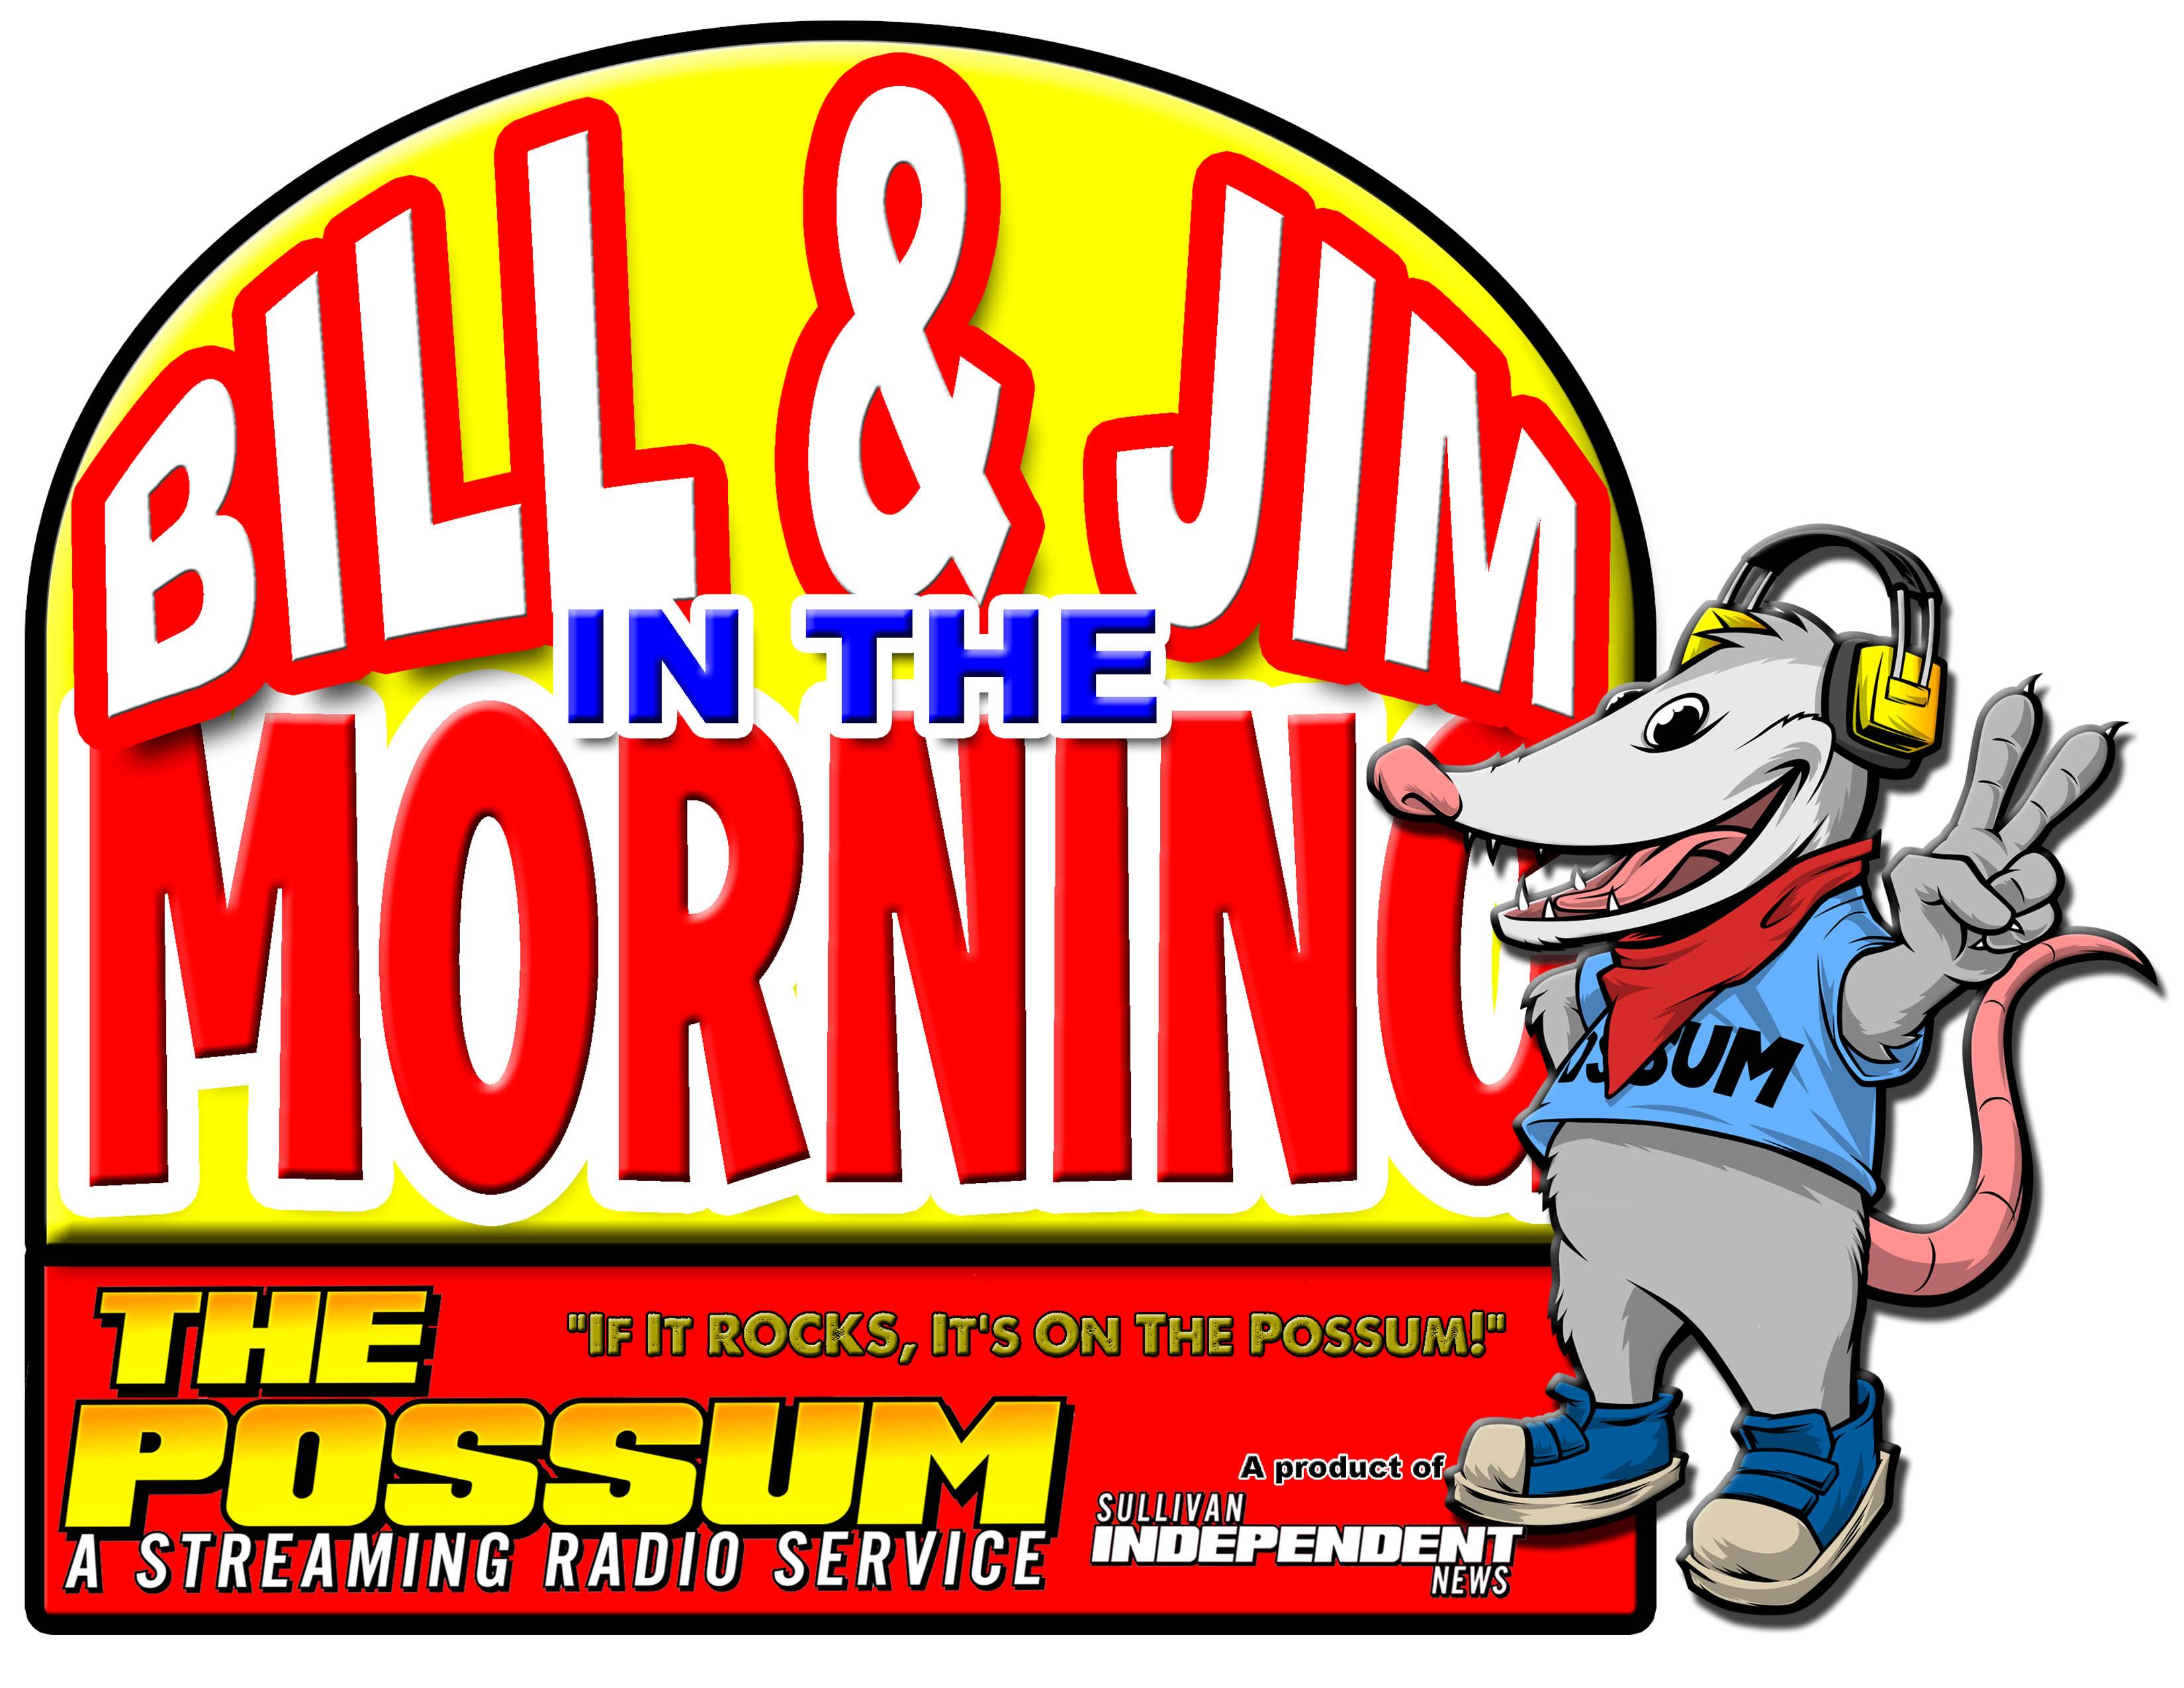 Comic/Actor/Television Host Bill Bellamy To Be Guest on Bill and Jim in the Morning Tuesday (07/13) Sullivan Independent News